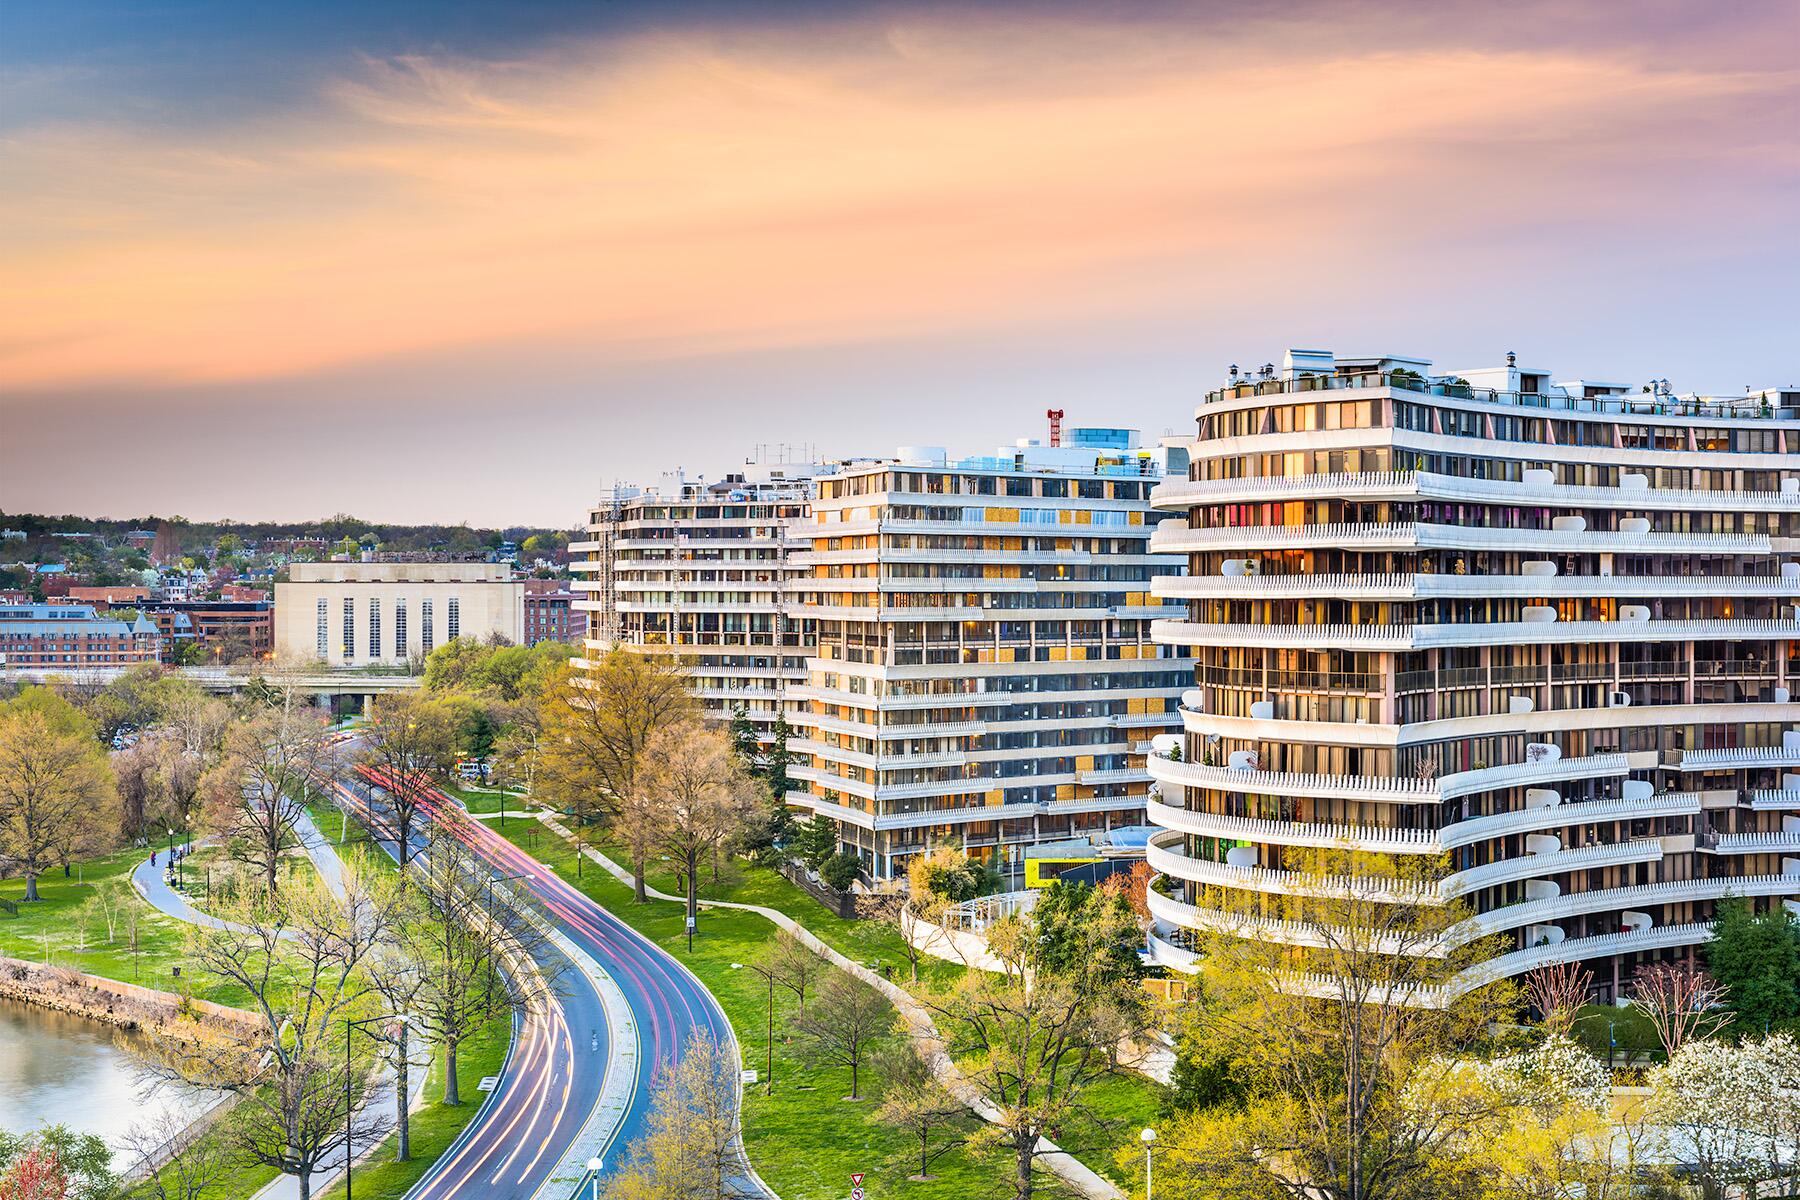 <a href='https://www.fodors.com/world/north-america/usa/washington-dc/experiences/news/photos/best-historic-hotels-in-washington-d-c#'>From &quot;The 10 Best Historic Hotels in Washington D.C.: The Watergate Hotel&quot;</a>